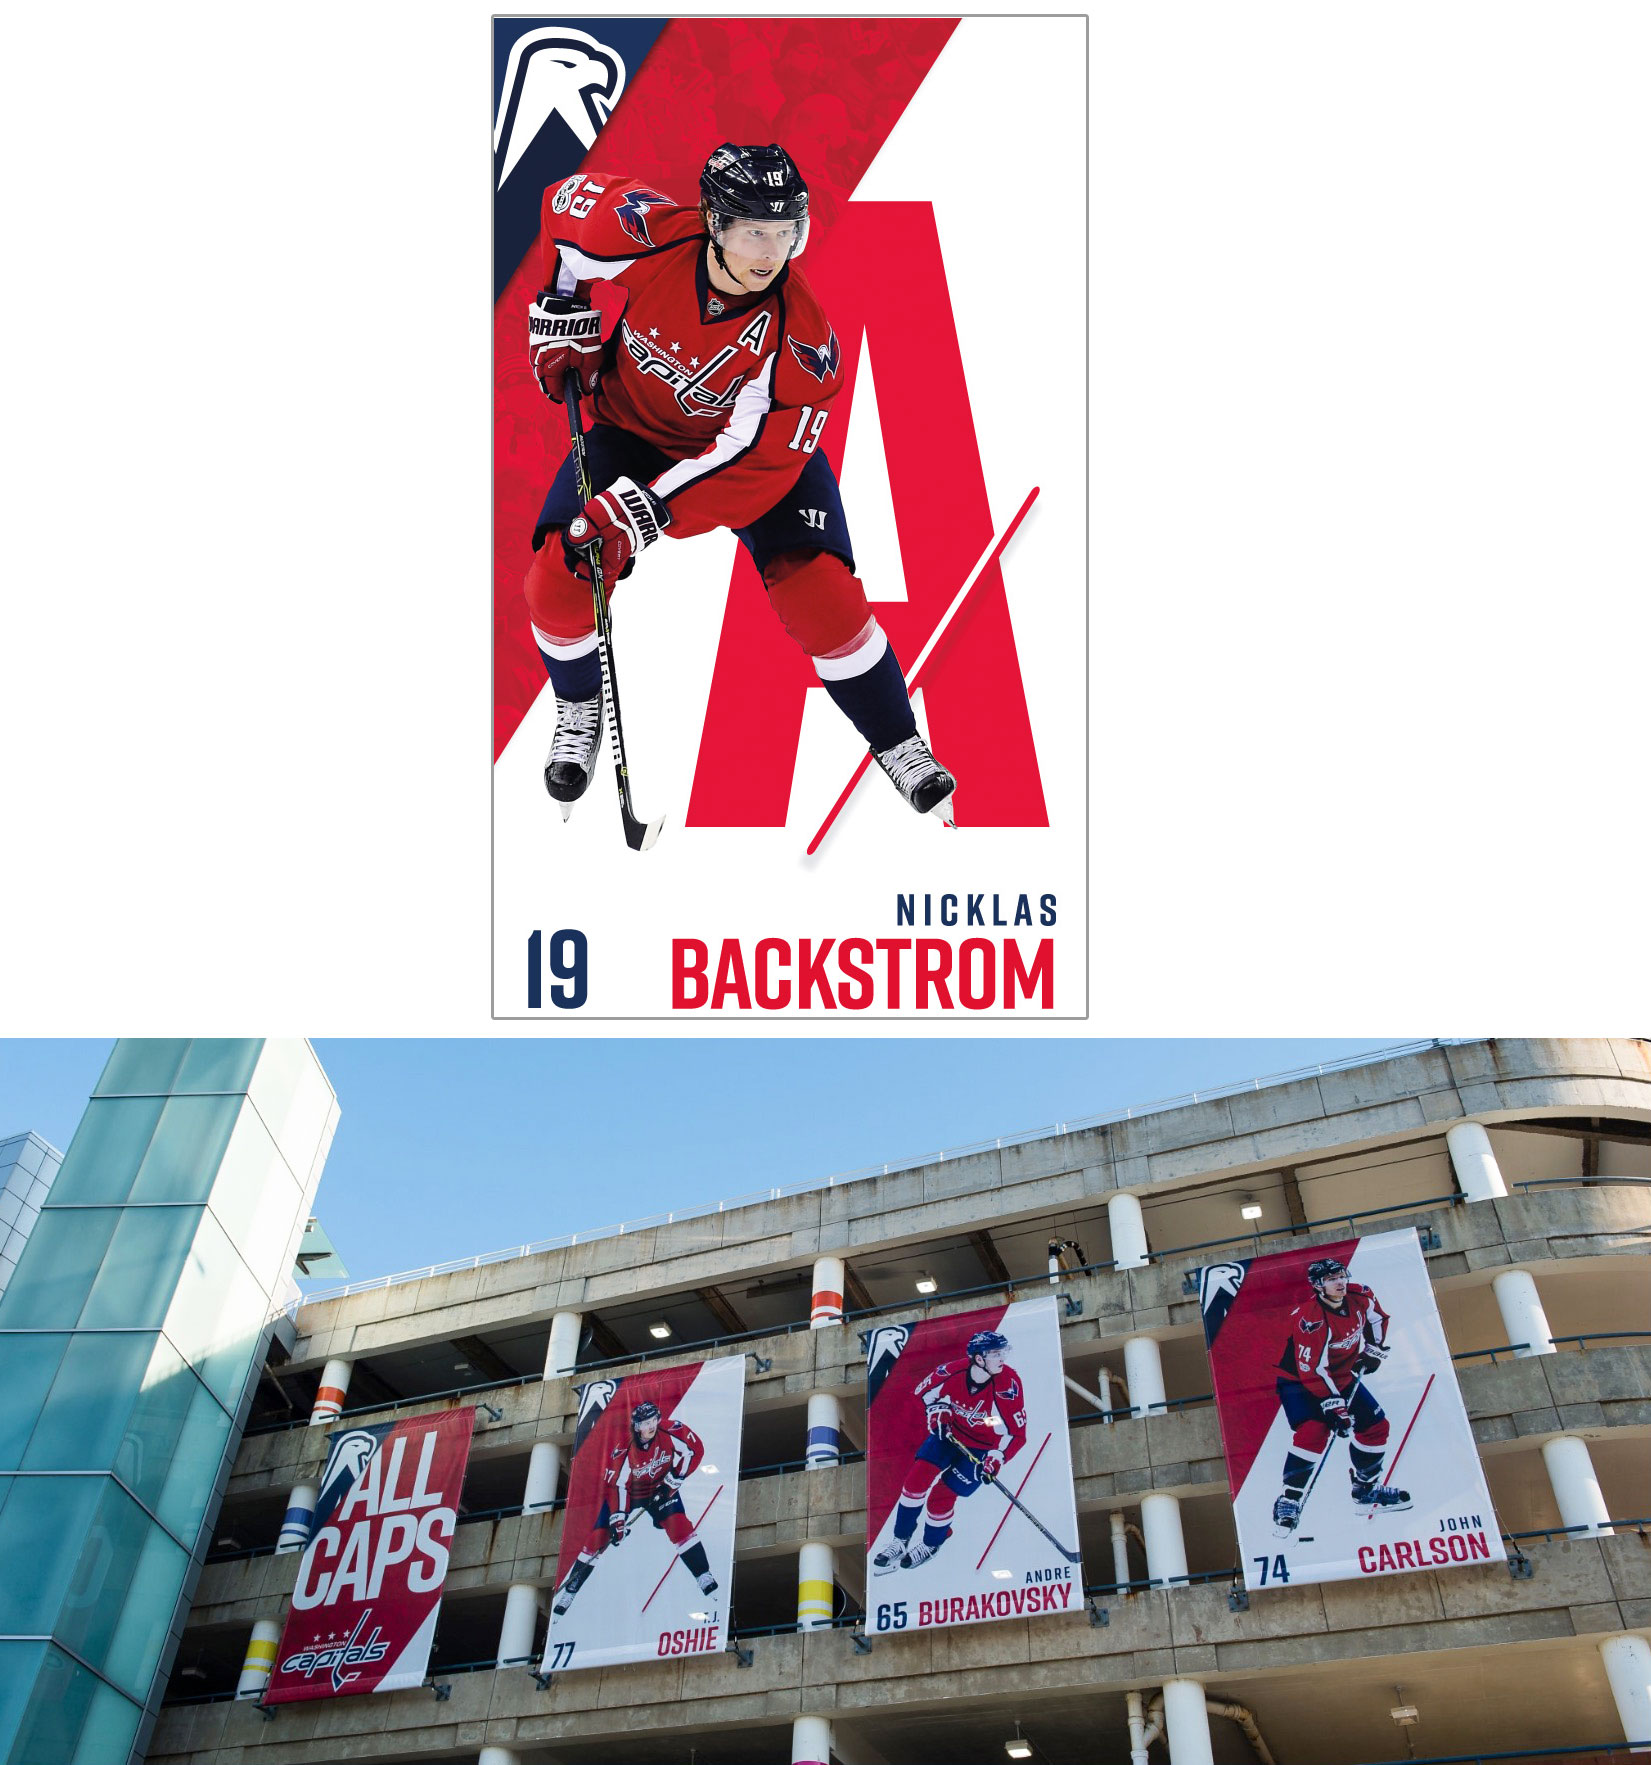  Client: FortyForty Agency for the Washington Capitols 